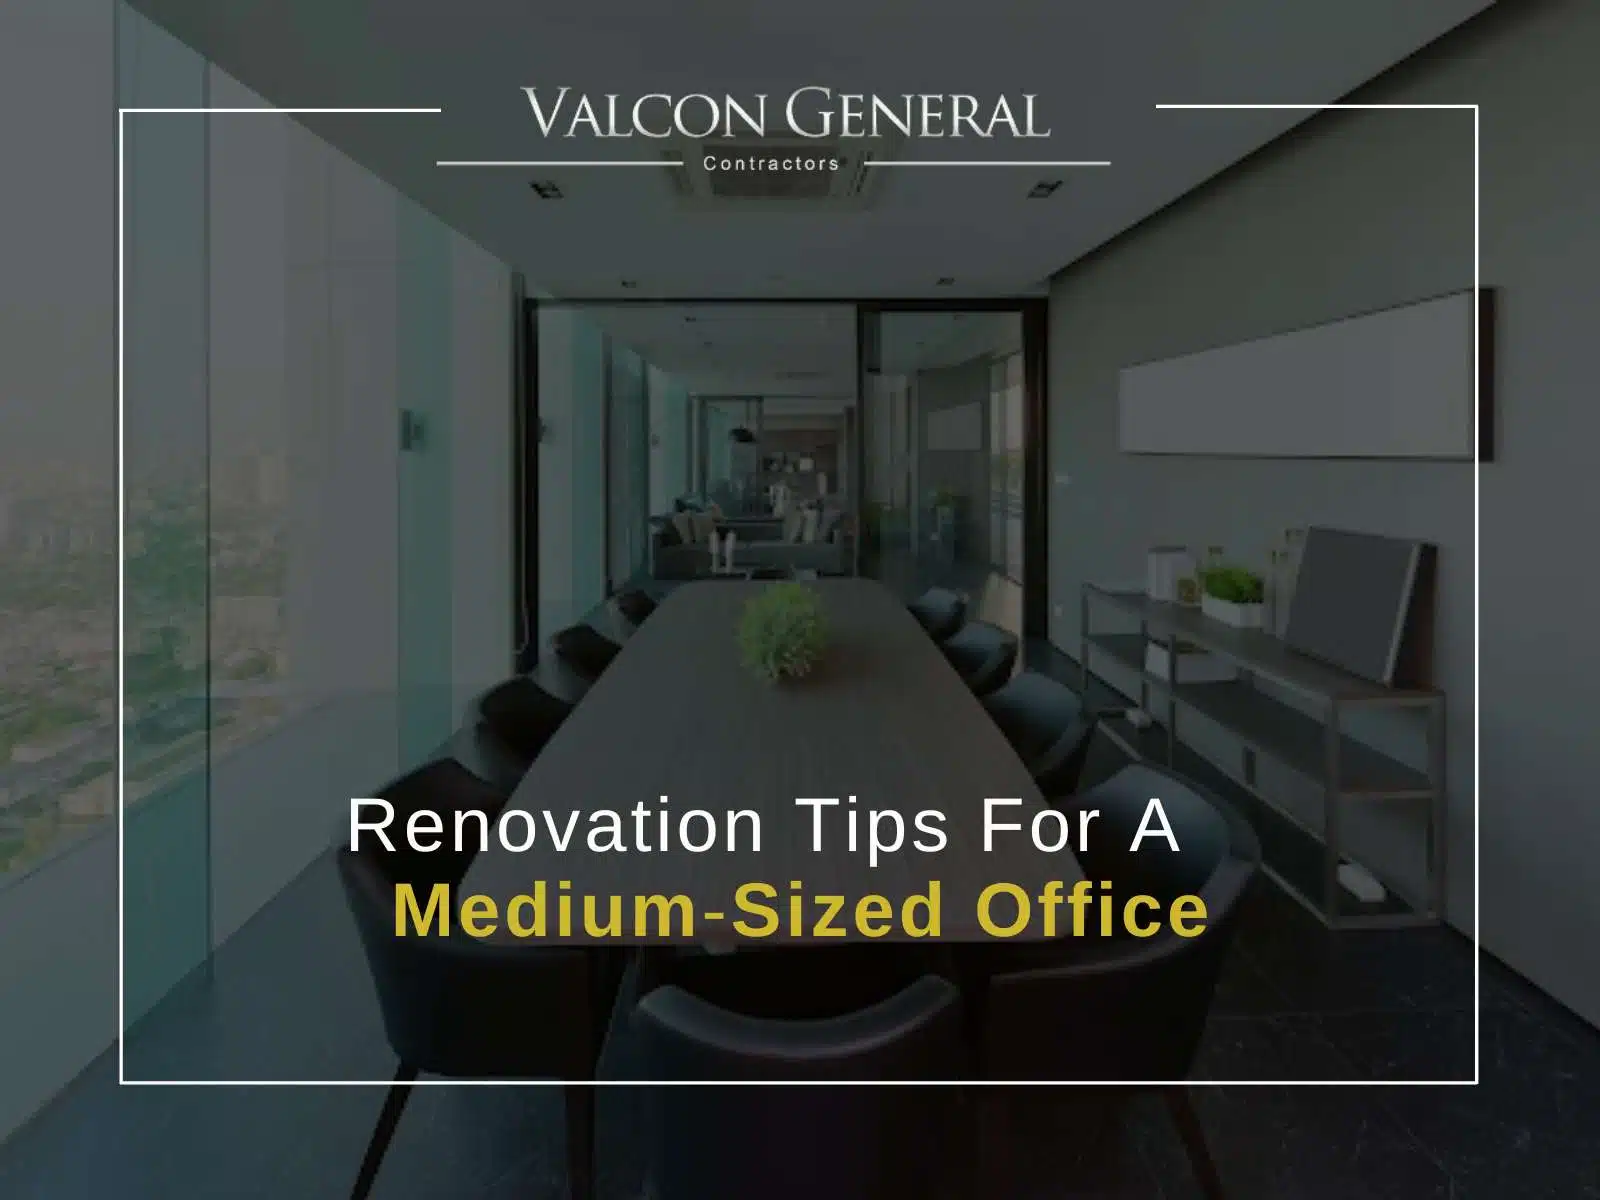 Renovation Tips For A Medium-Sized Office